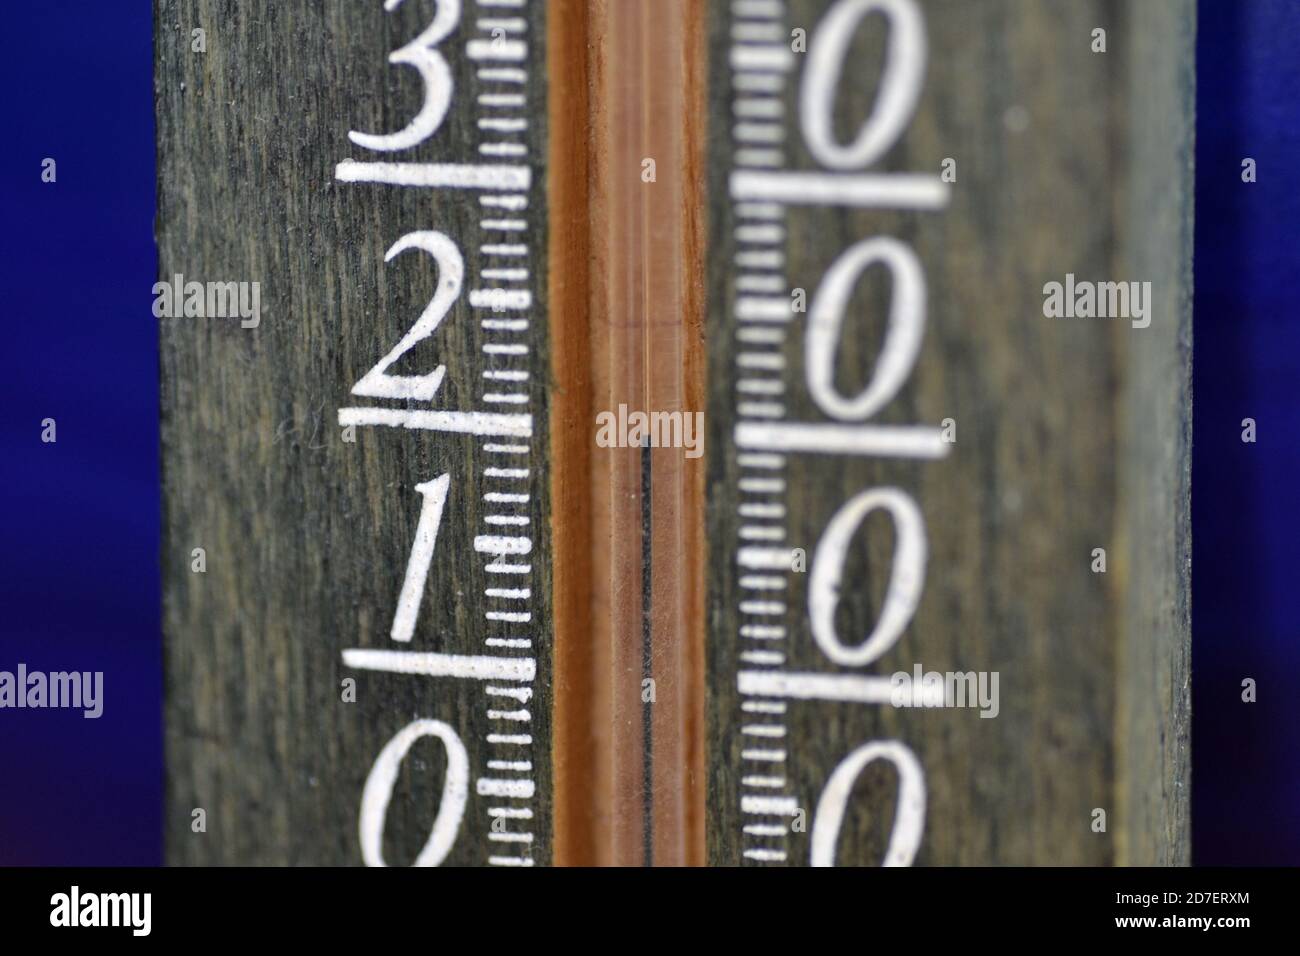 Thermometer zeigt 20 Grad Celsius an Stockfoto